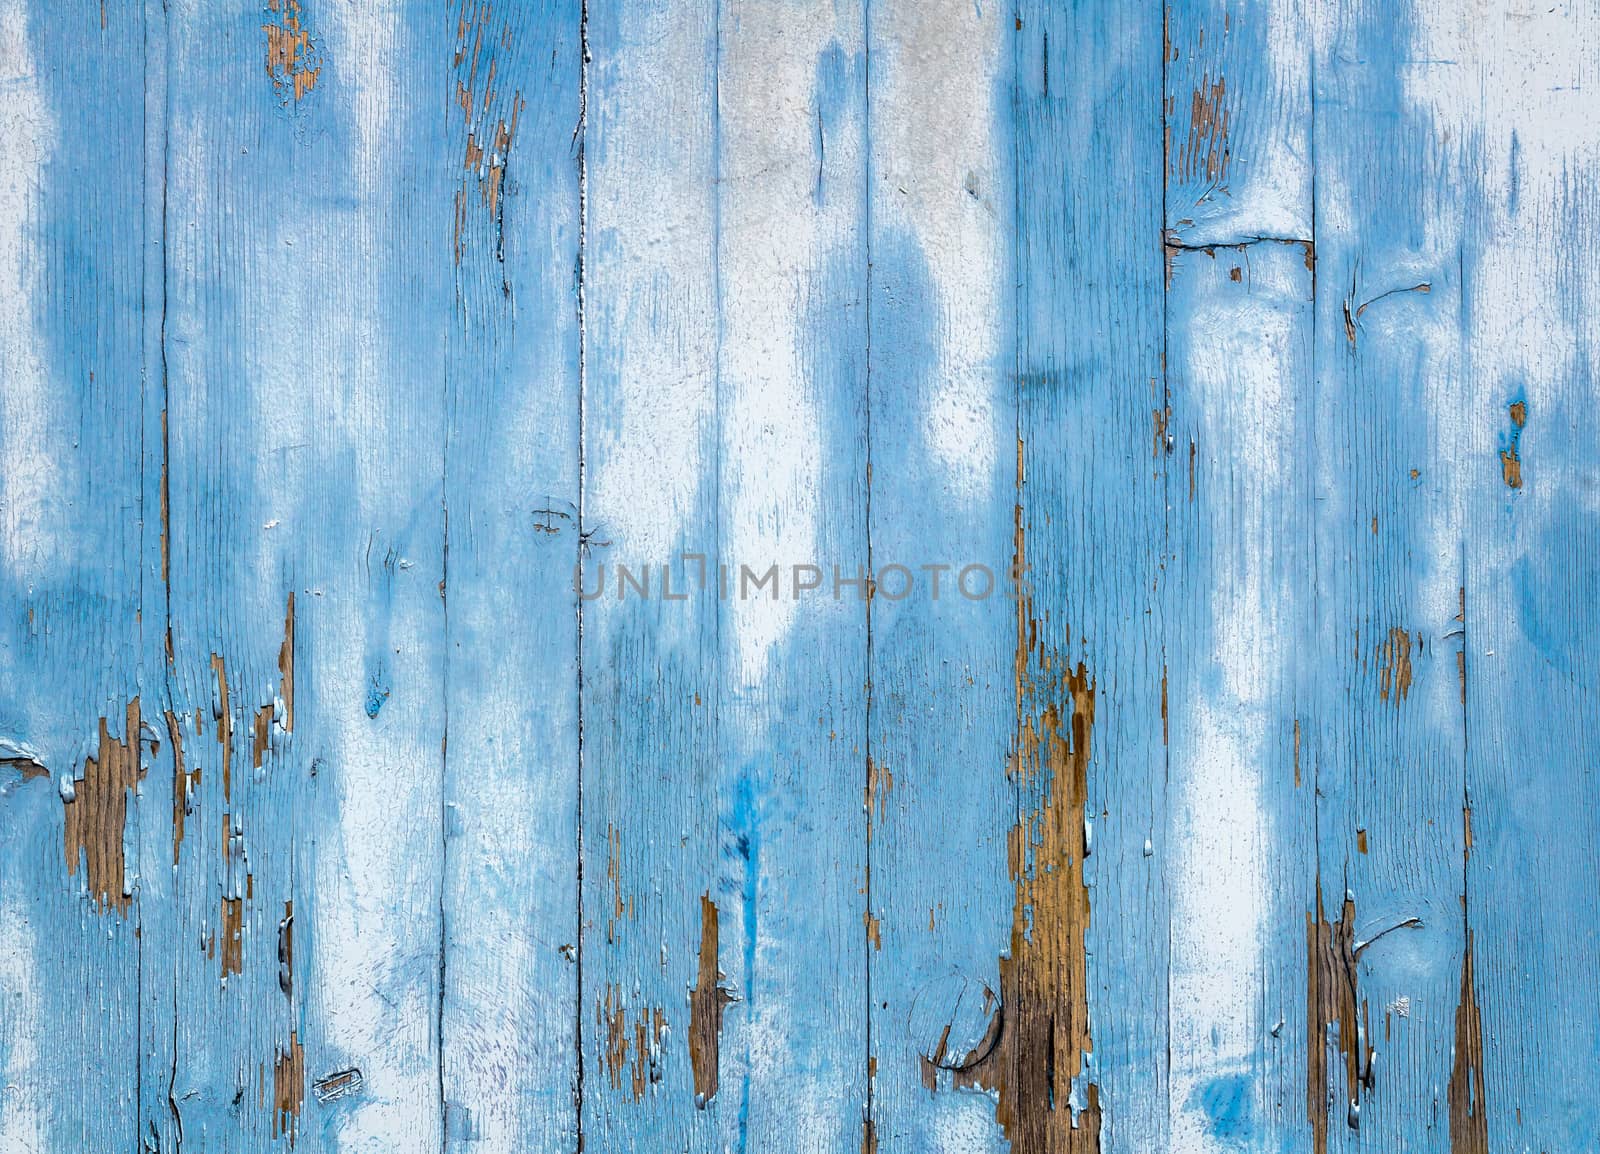 Old wooden blue painted surface by germanopoli